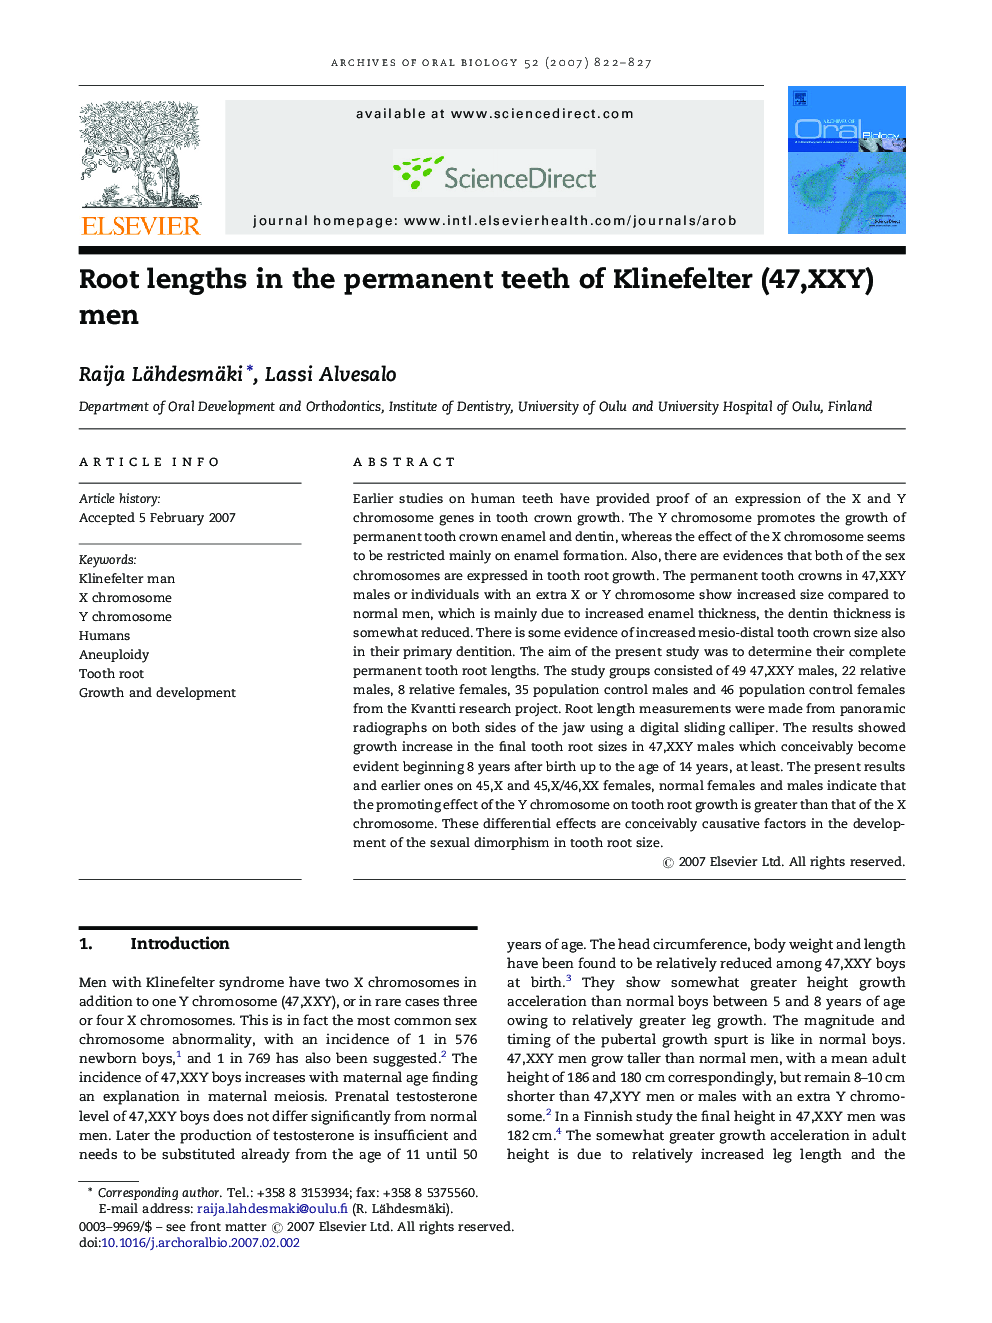 Root lengths in the permanent teeth of Klinefelter (47,XXY) men